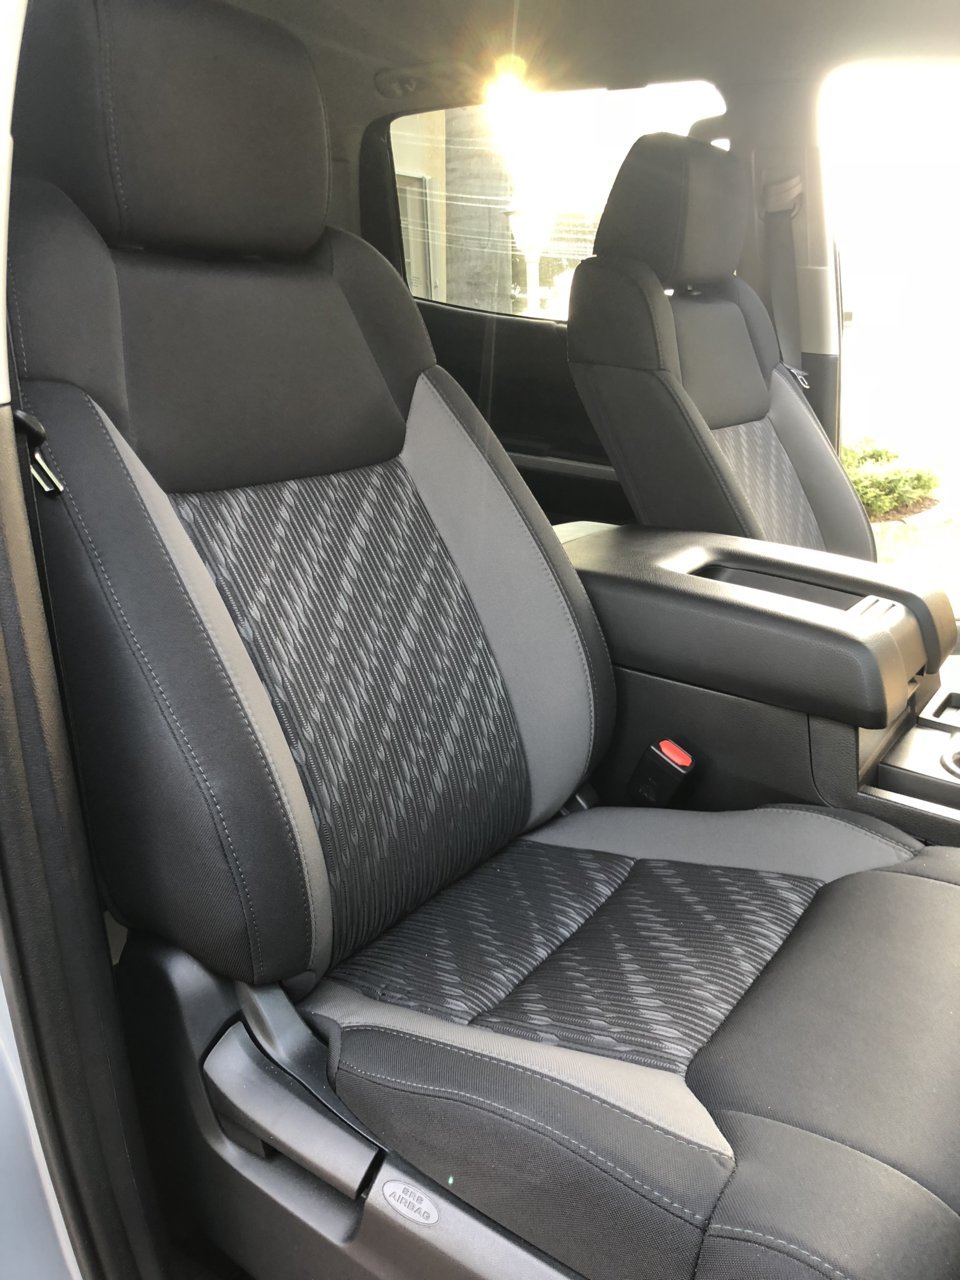 SOLD - 2018 Crewmax Seat Covers | Toyota Tundra Forum